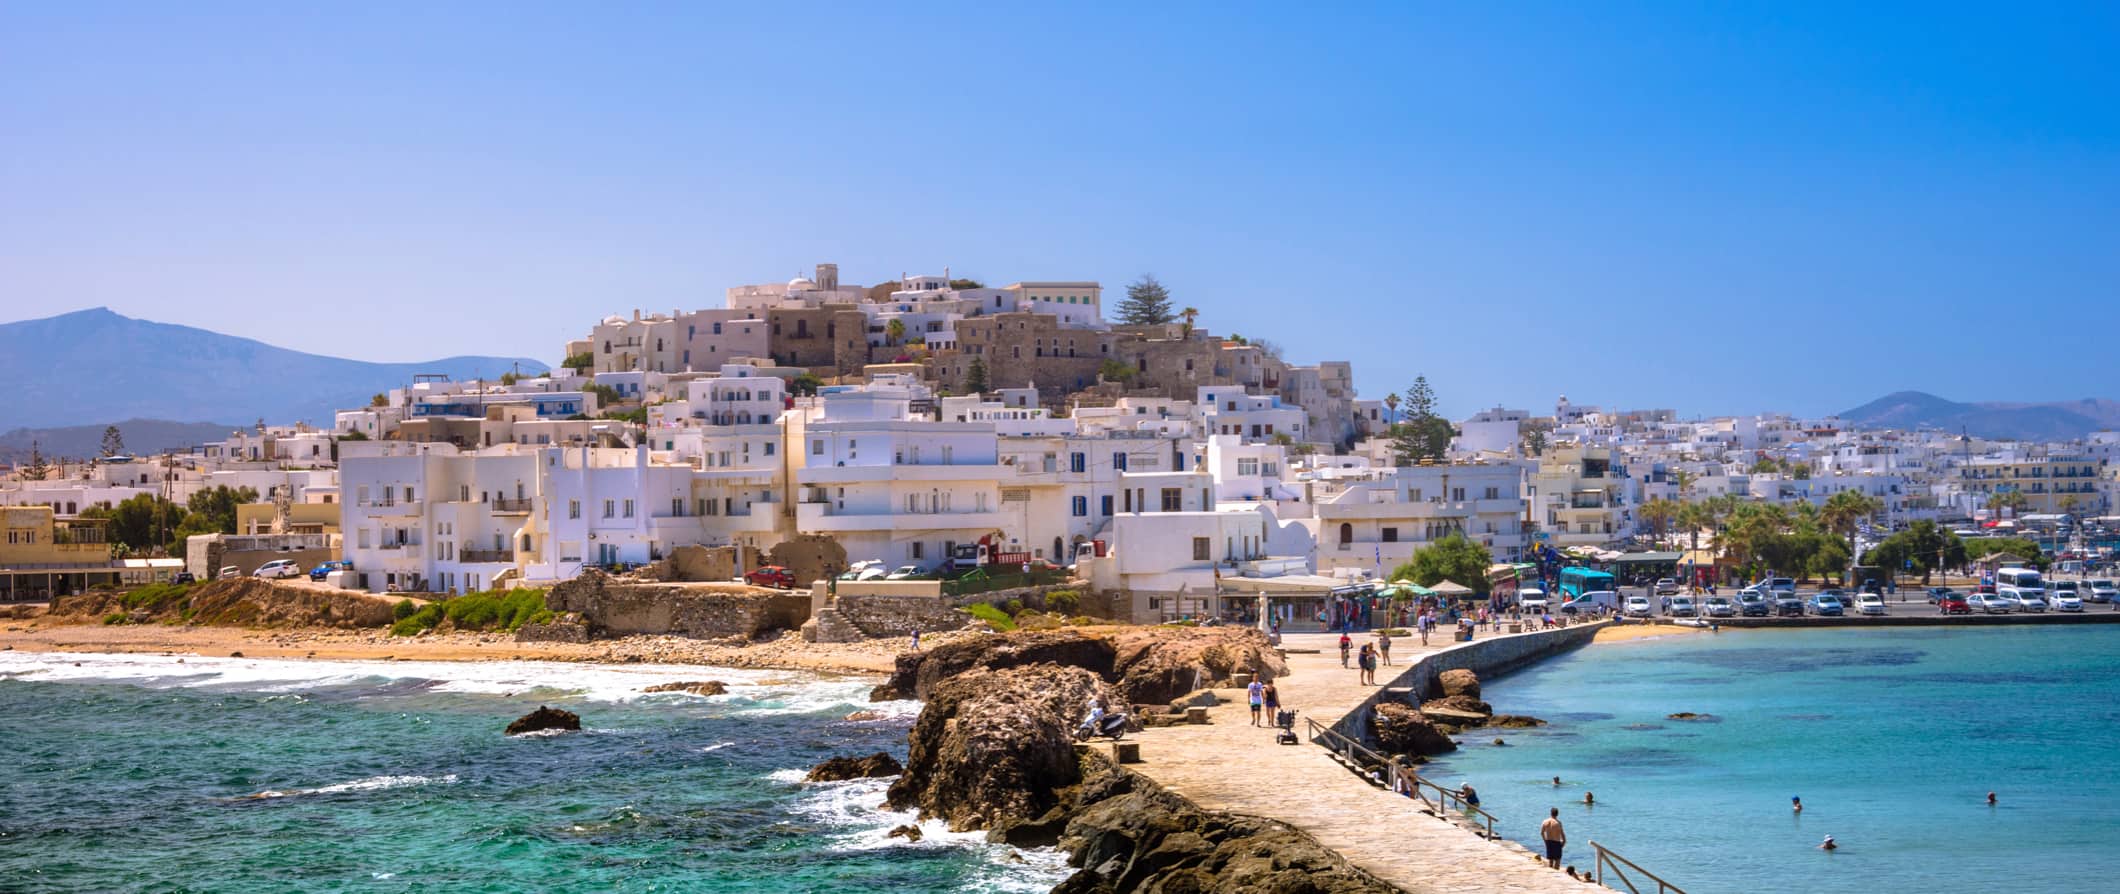 Private Naxos Cruise from Mykonos by Aegean Ventures